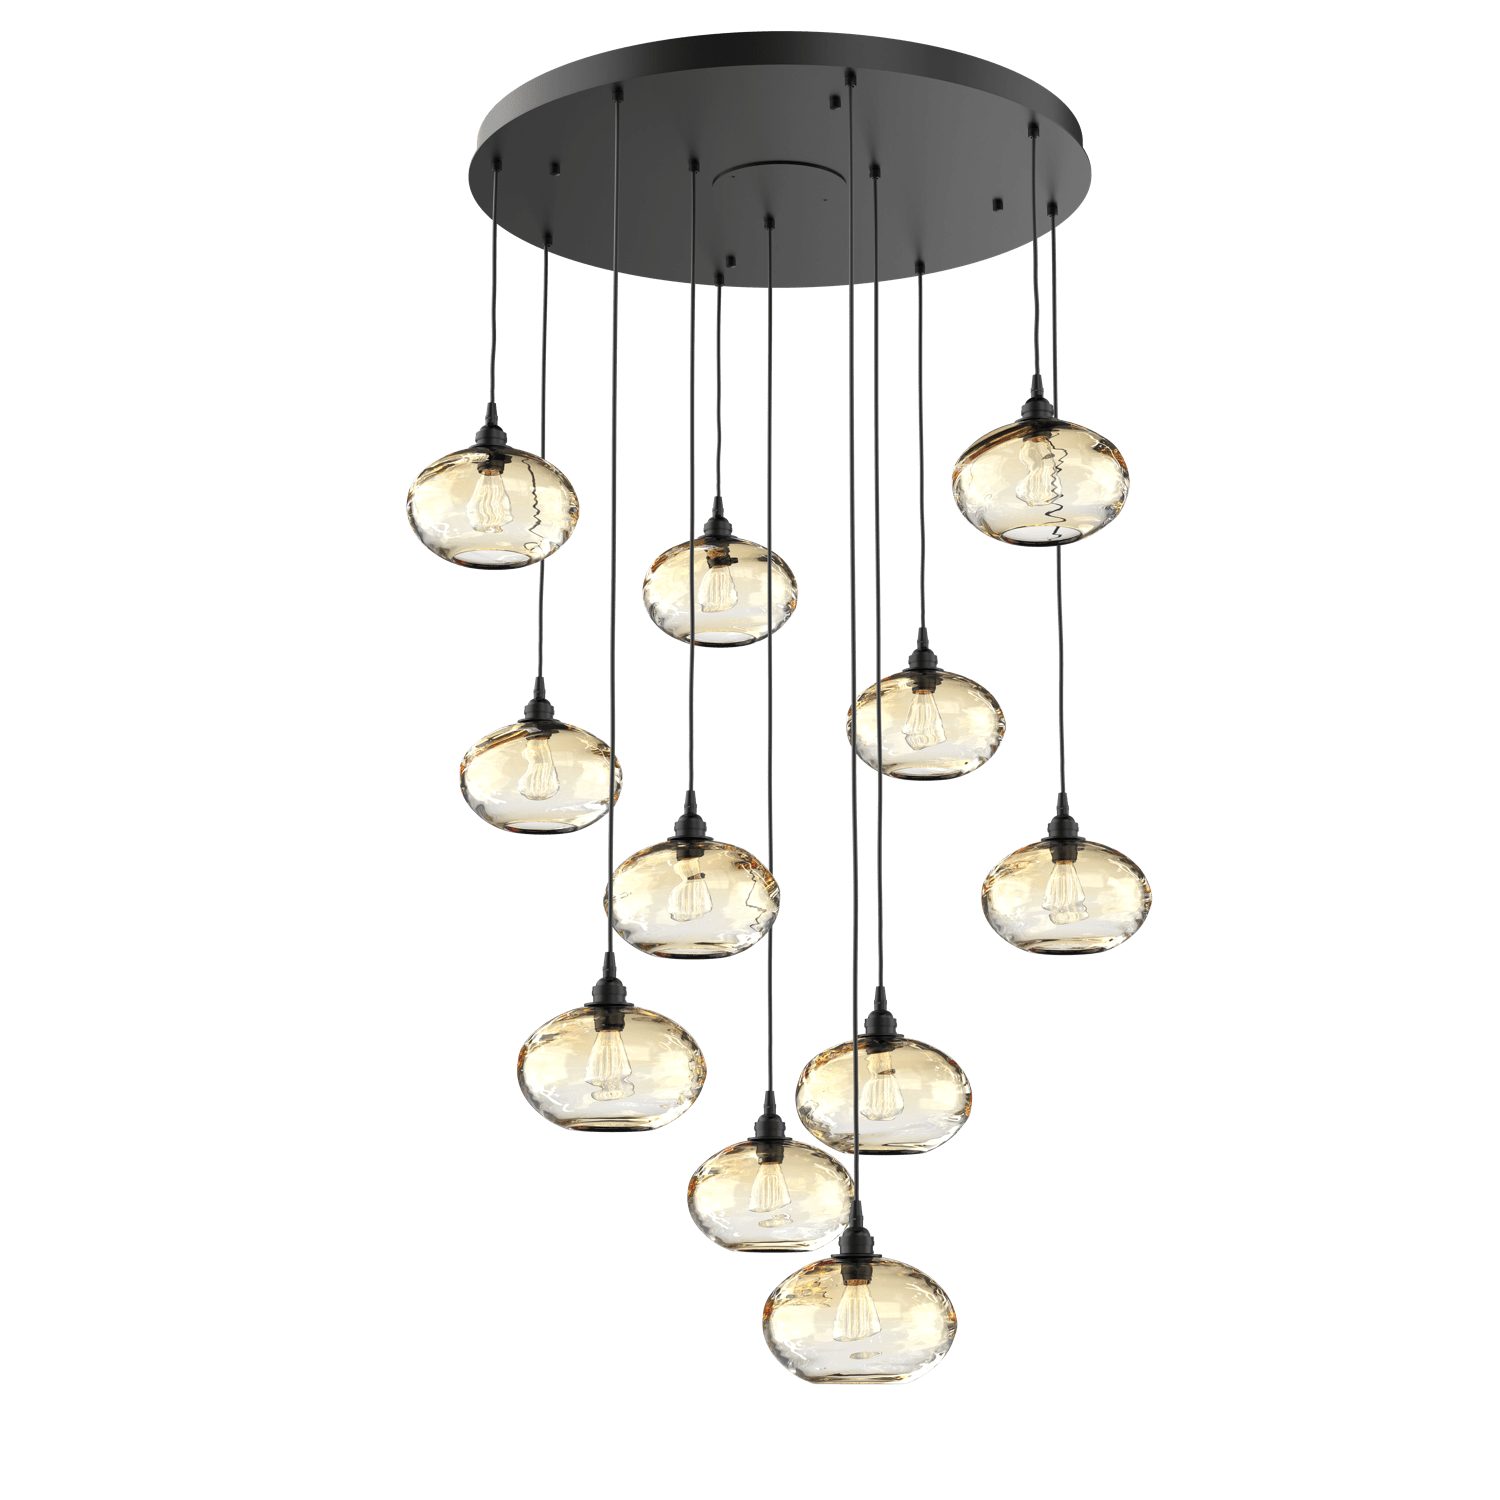 CHB0036-11-MB-OA-Hammerton-Studio-Optic-Blown-Glass-Coppa-11-light-round-pendant-chandelier-with-matte-black-finish-and-optic-amber-blown-glass-shades-and-incandescent-lamping